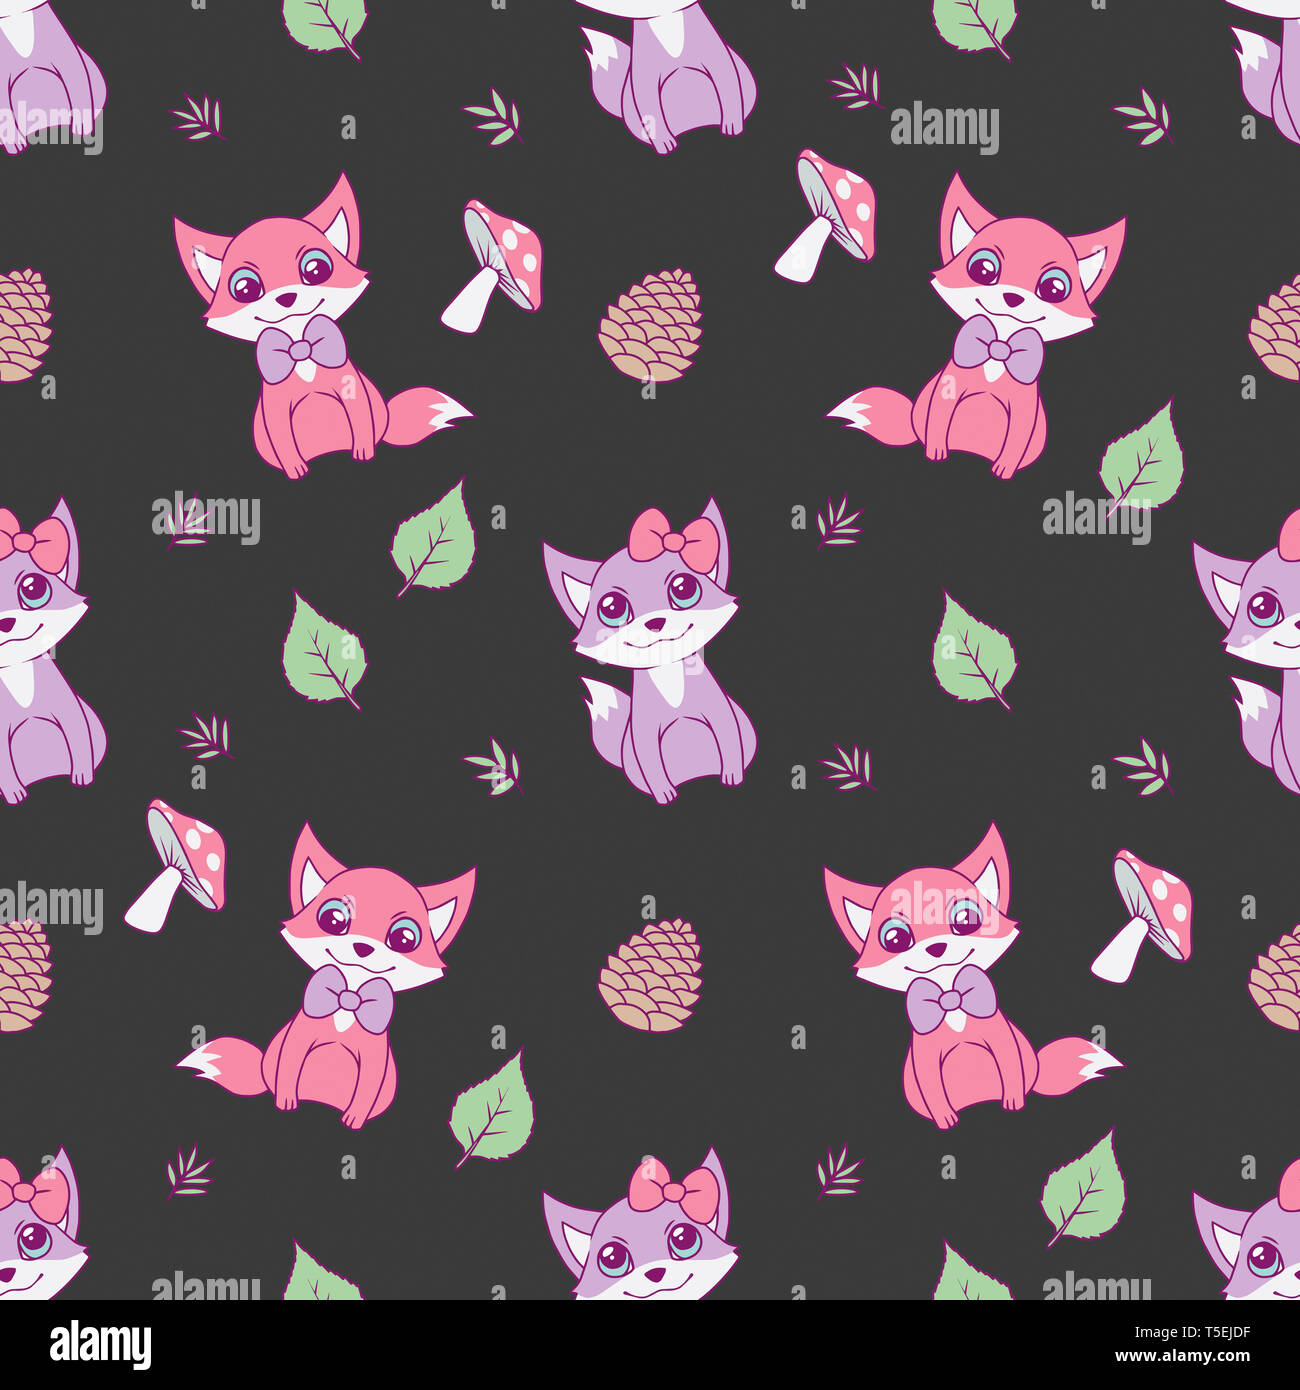 Cute seamless animal pattern for children designs with pastel pink and violet foxes, leaves and mushrooms on dark black background Stock Photo